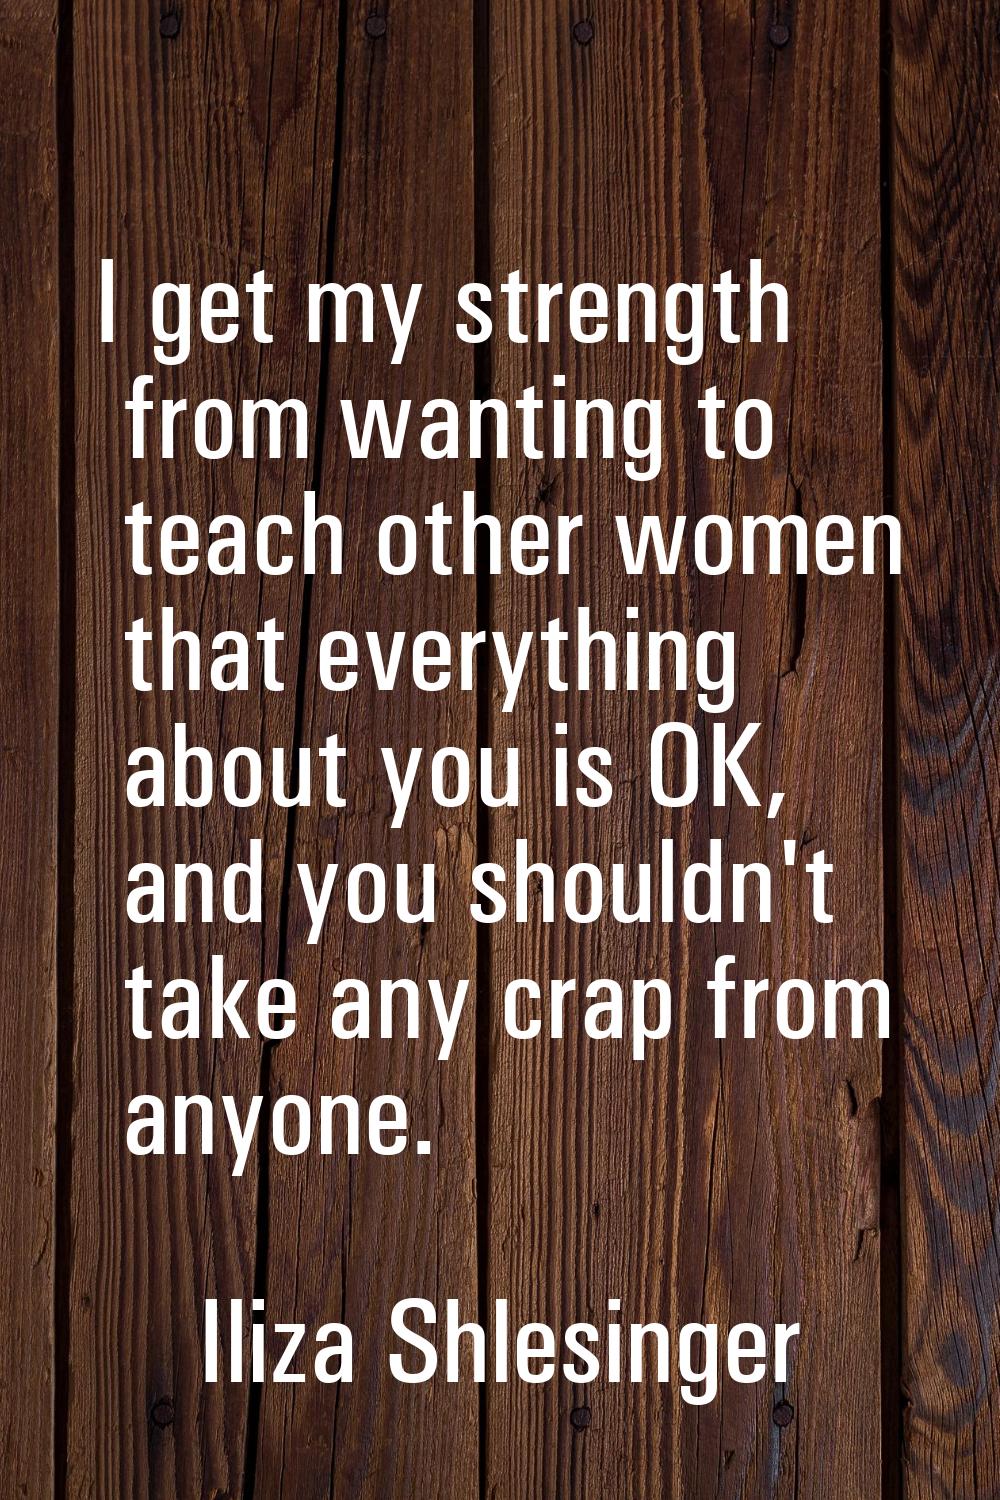 I get my strength from wanting to teach other women that everything about you is OK, and you should